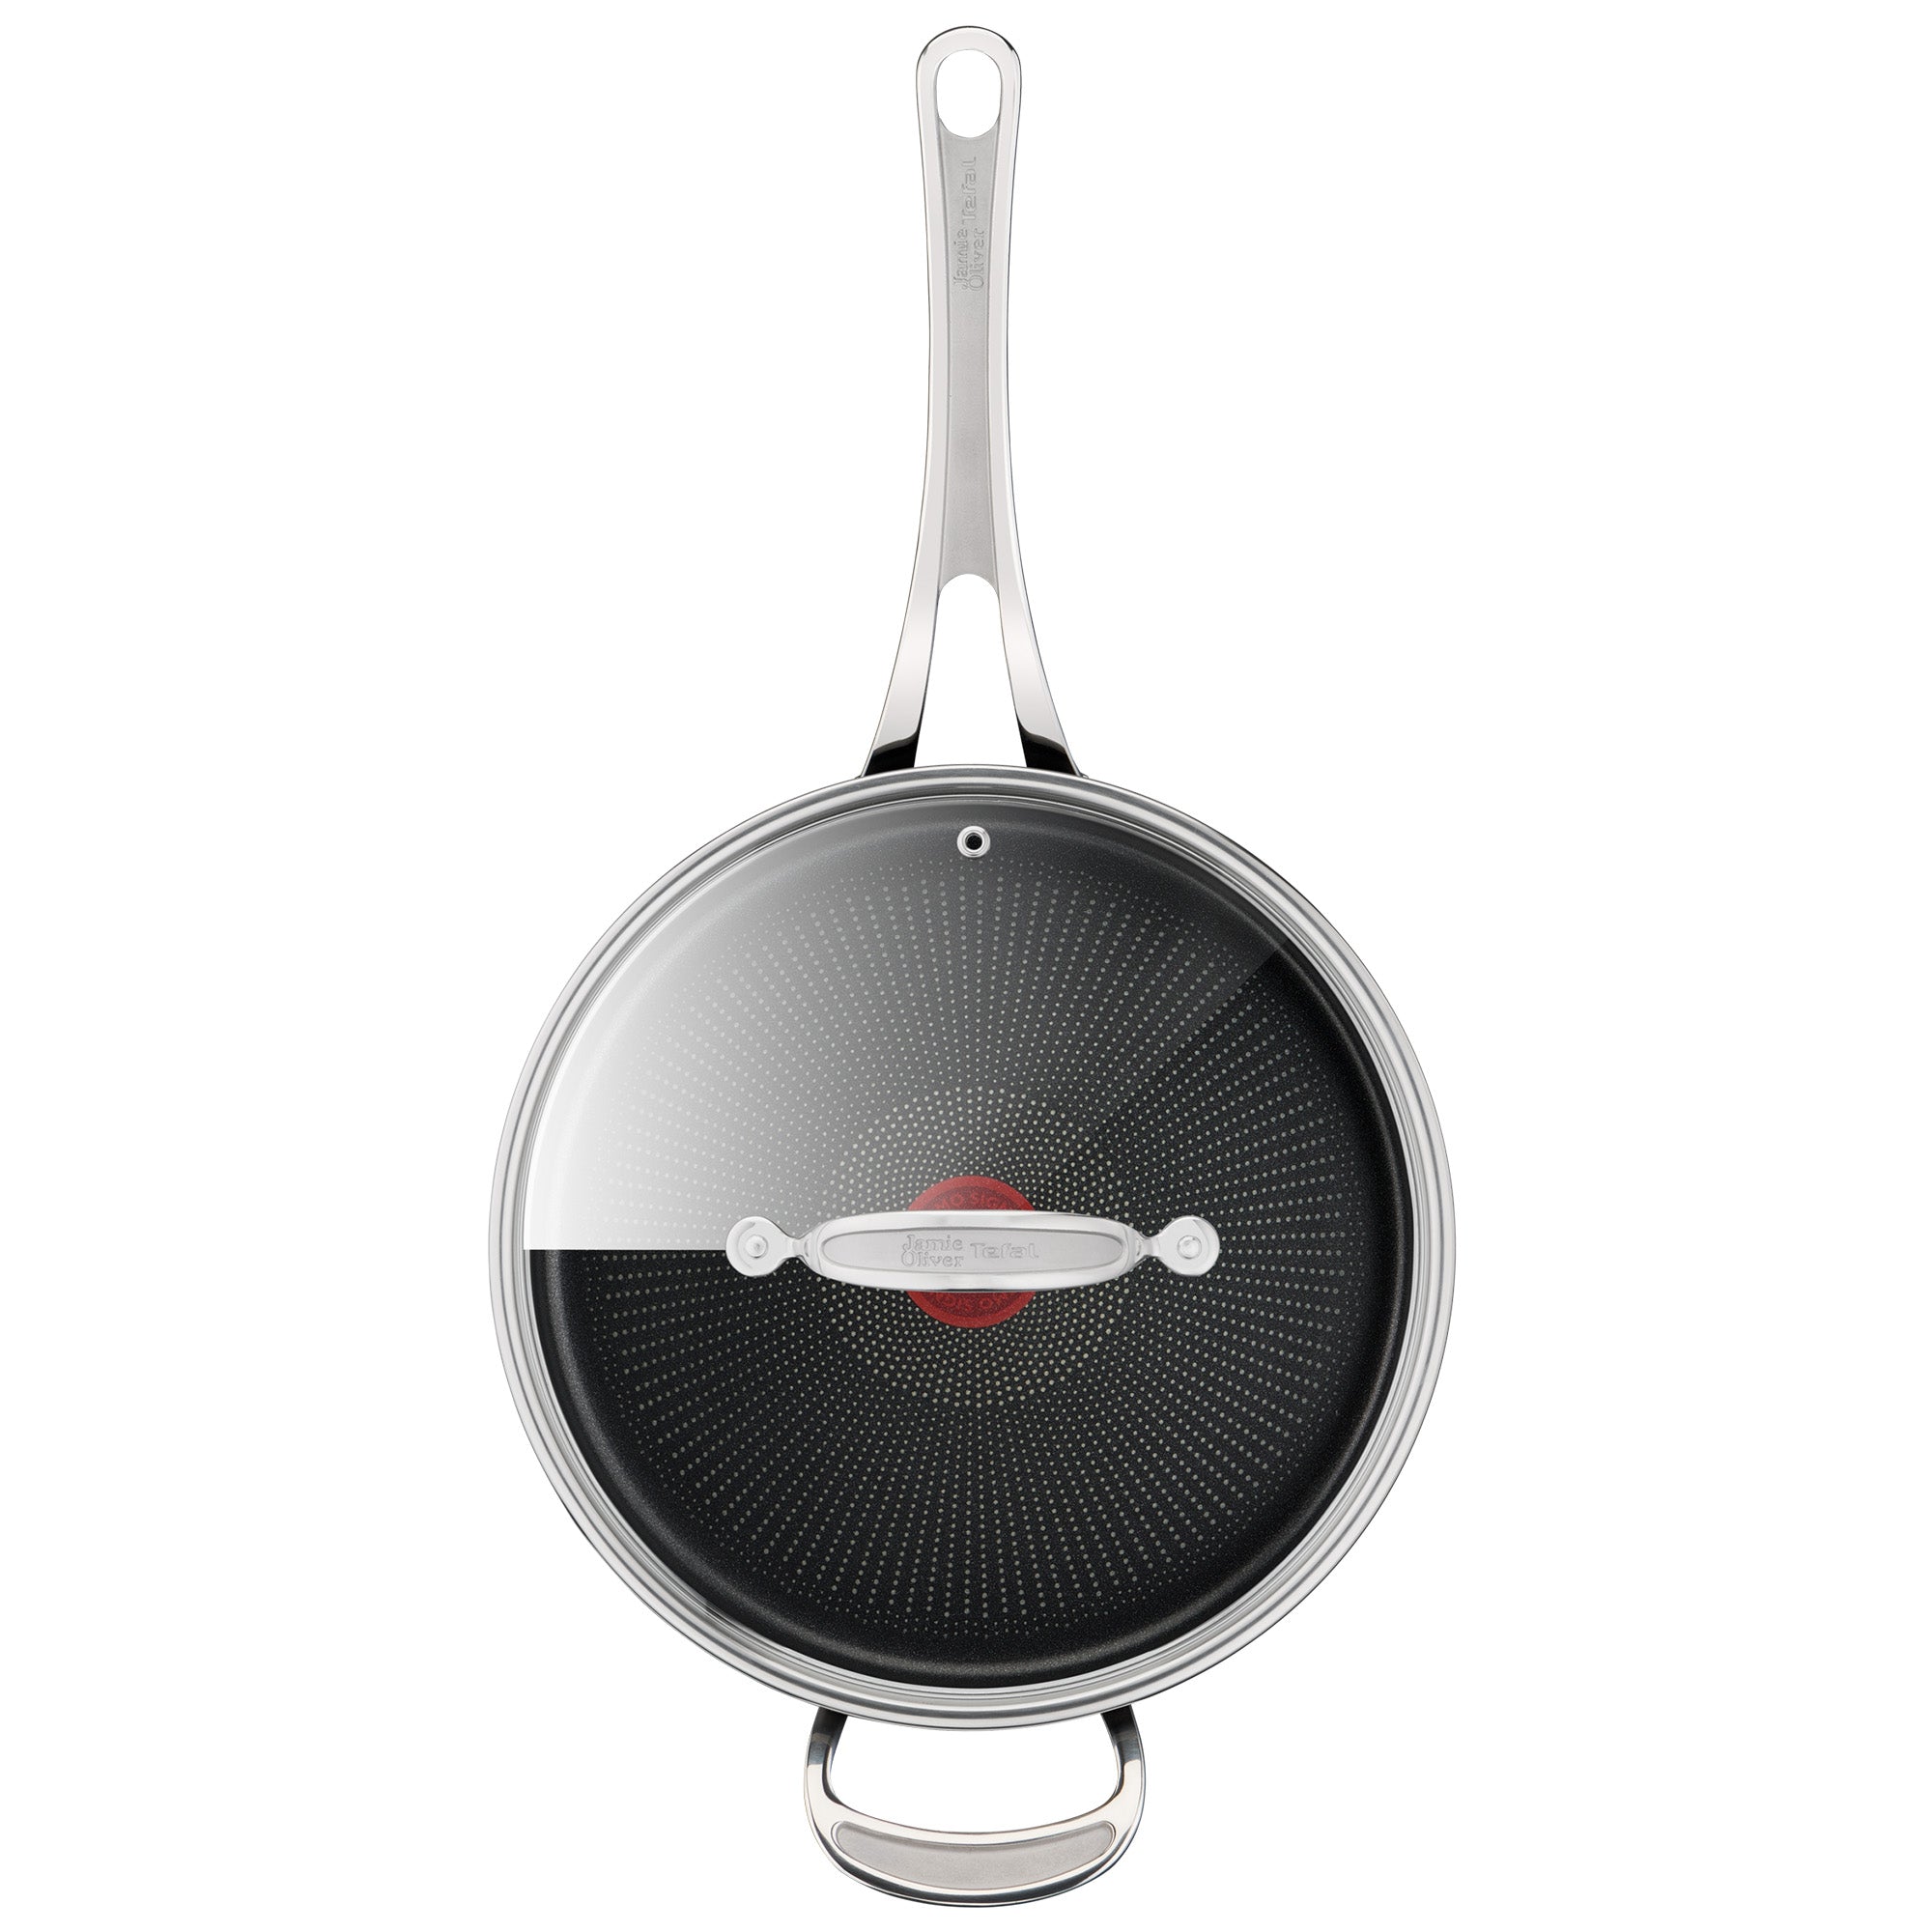 Jamie Oliver by Tefal Cooks Classic Non-Stick Induction Hard Anodised Sautepan + Lid 26cm